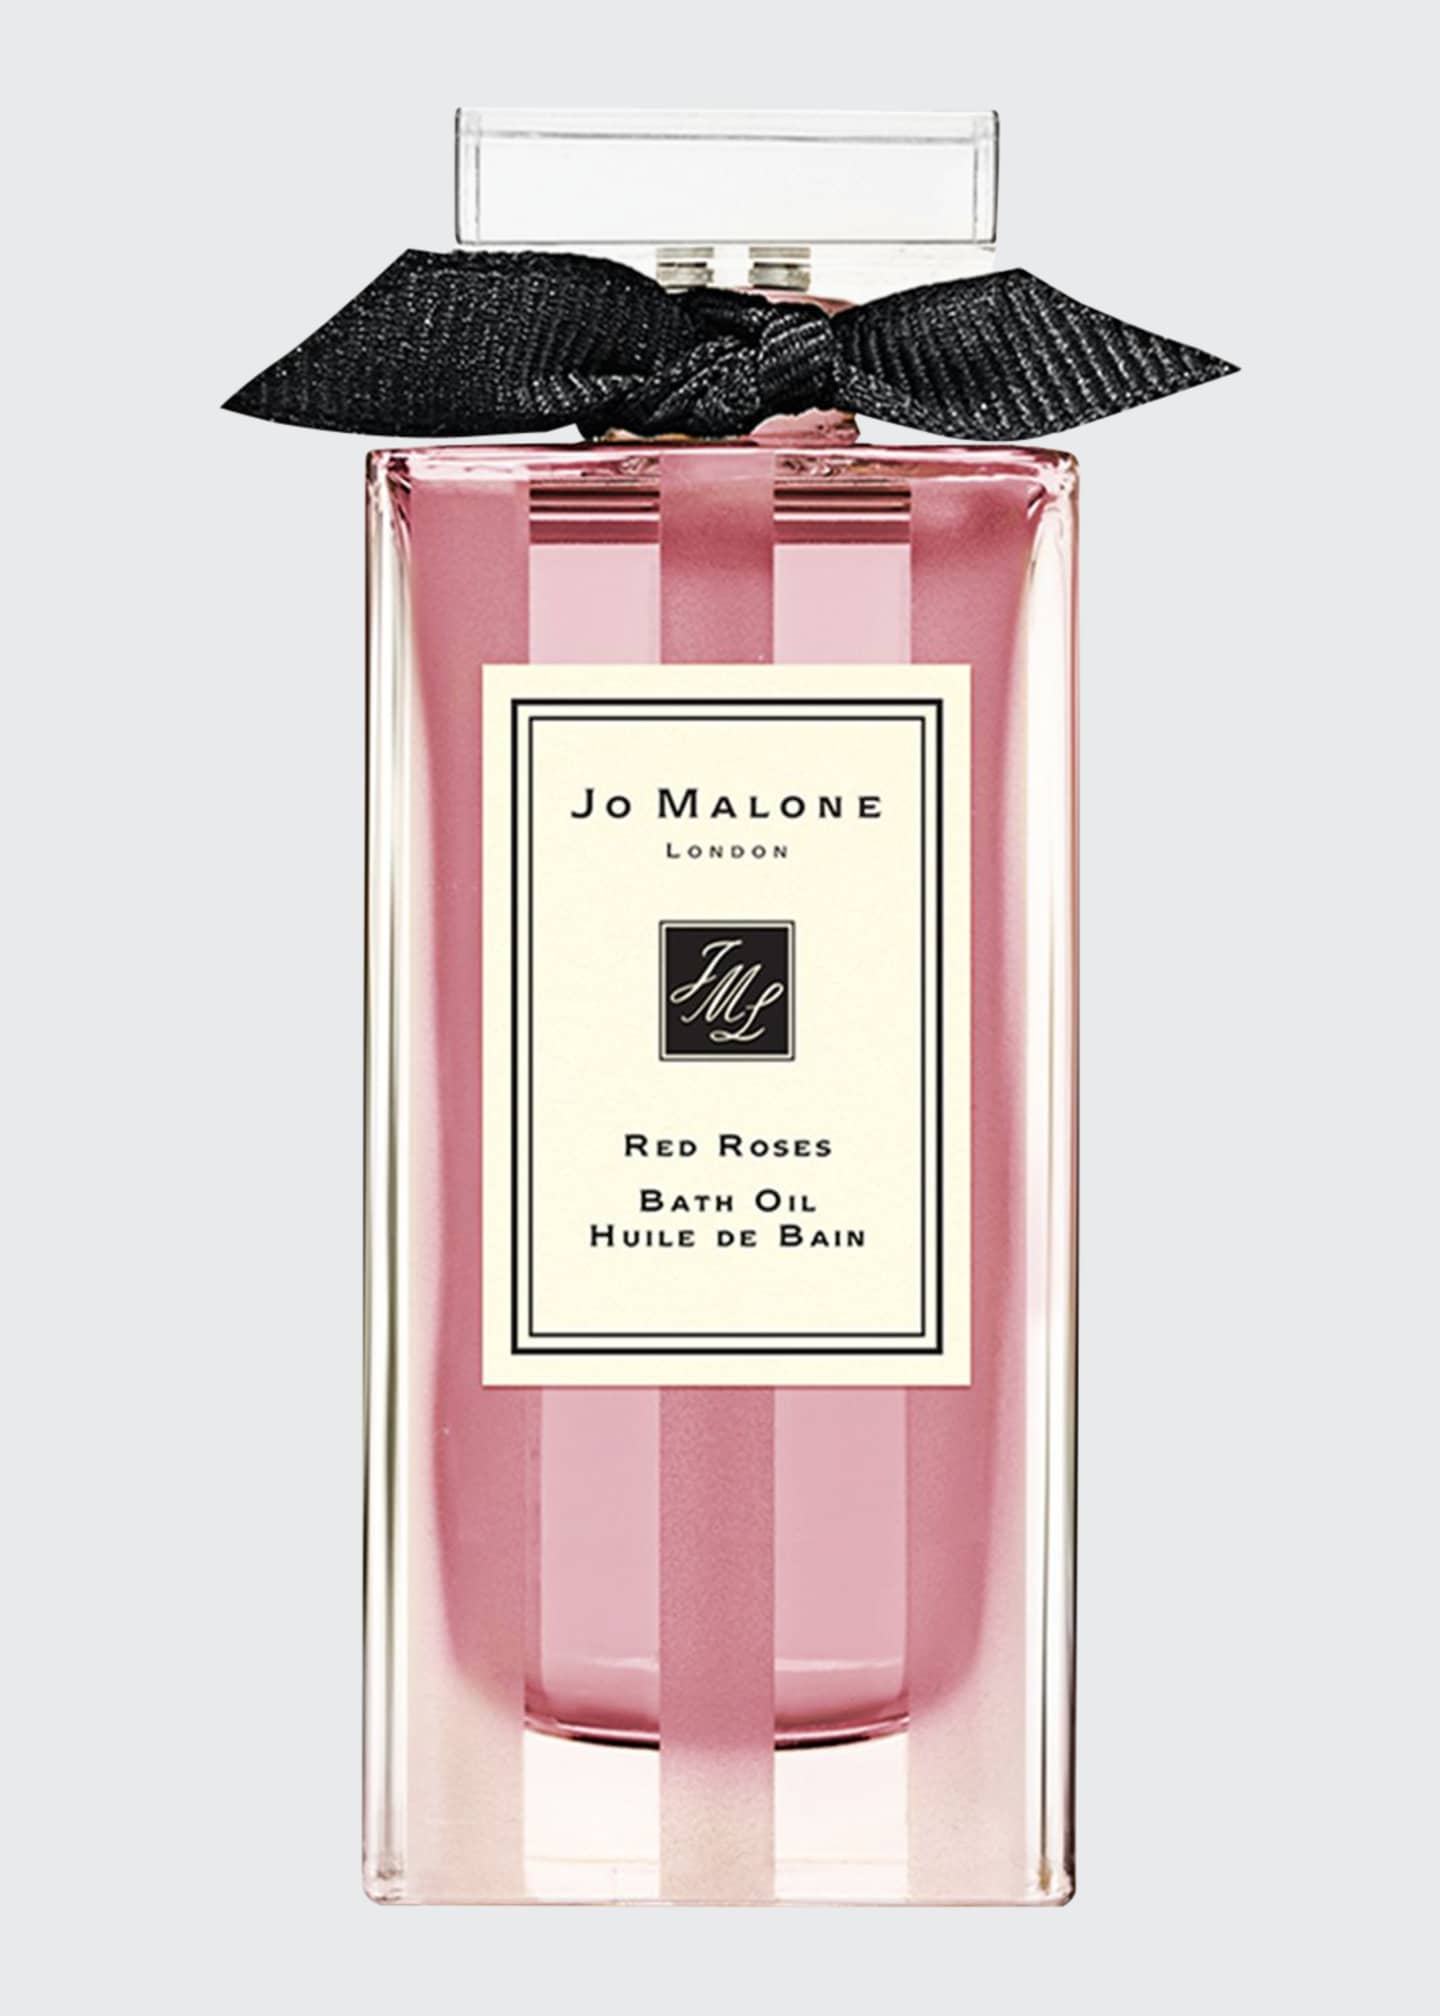 Jo Malone London Red Roses Bath Oil, 30 mL Image 1 of 2